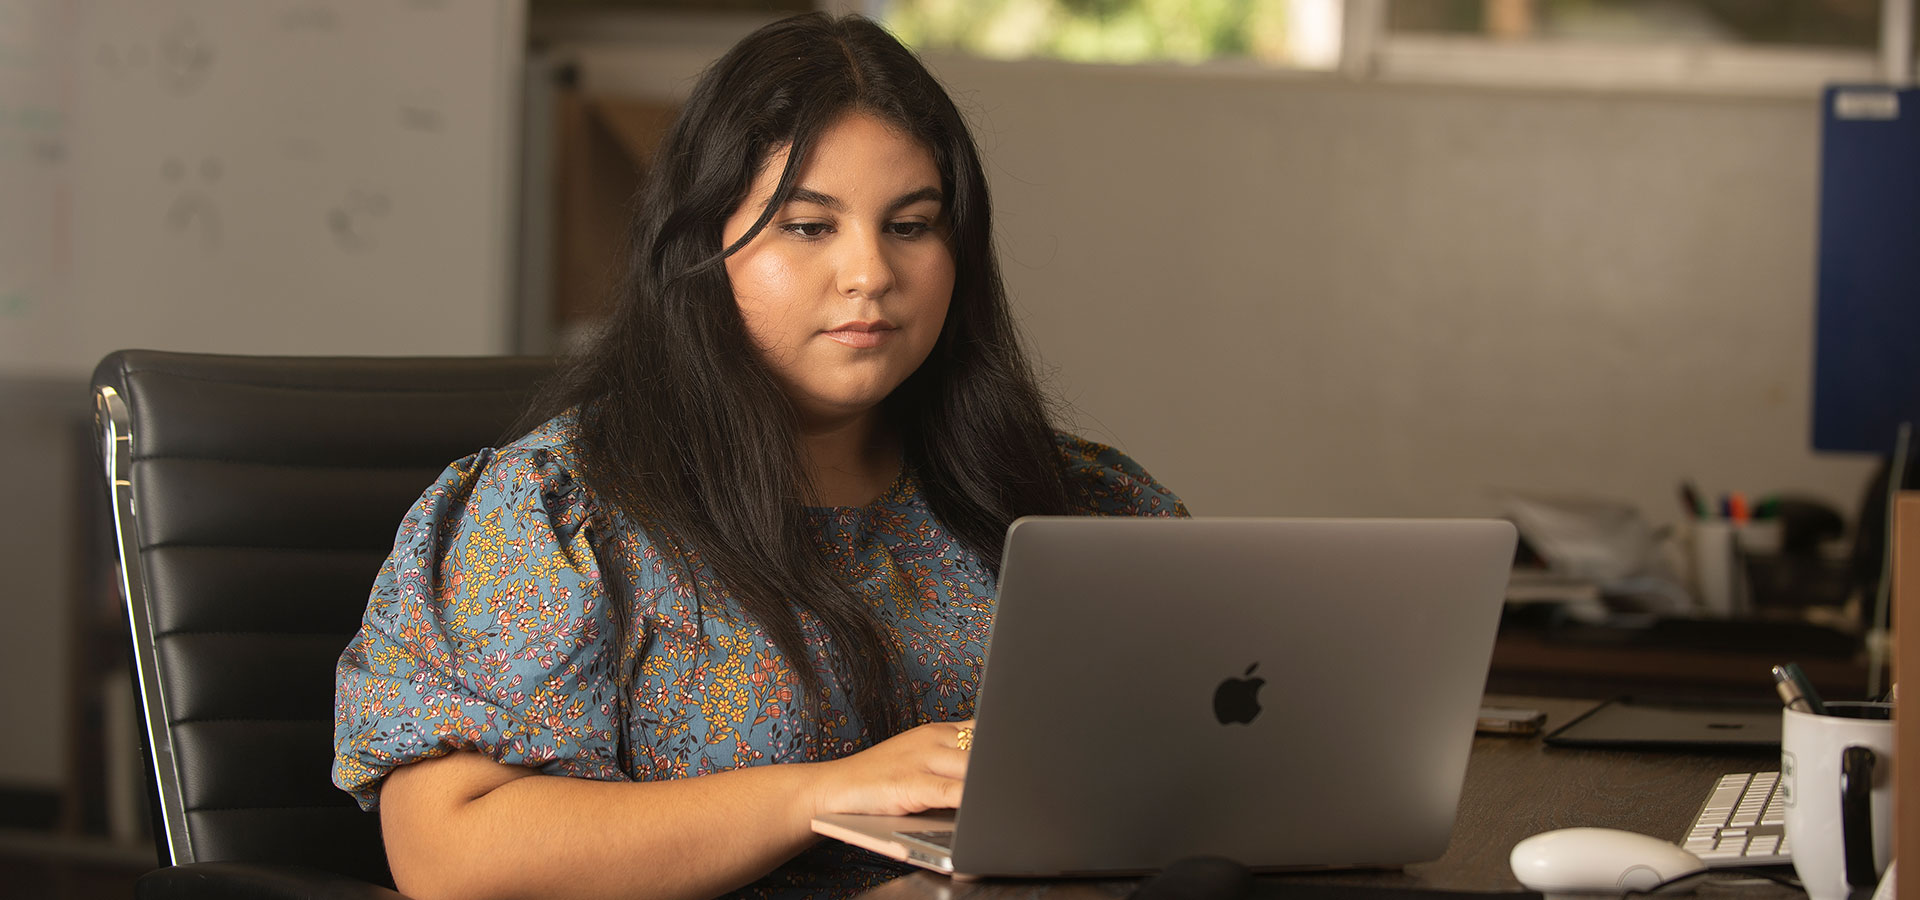 A girl sits at a table with a laptop